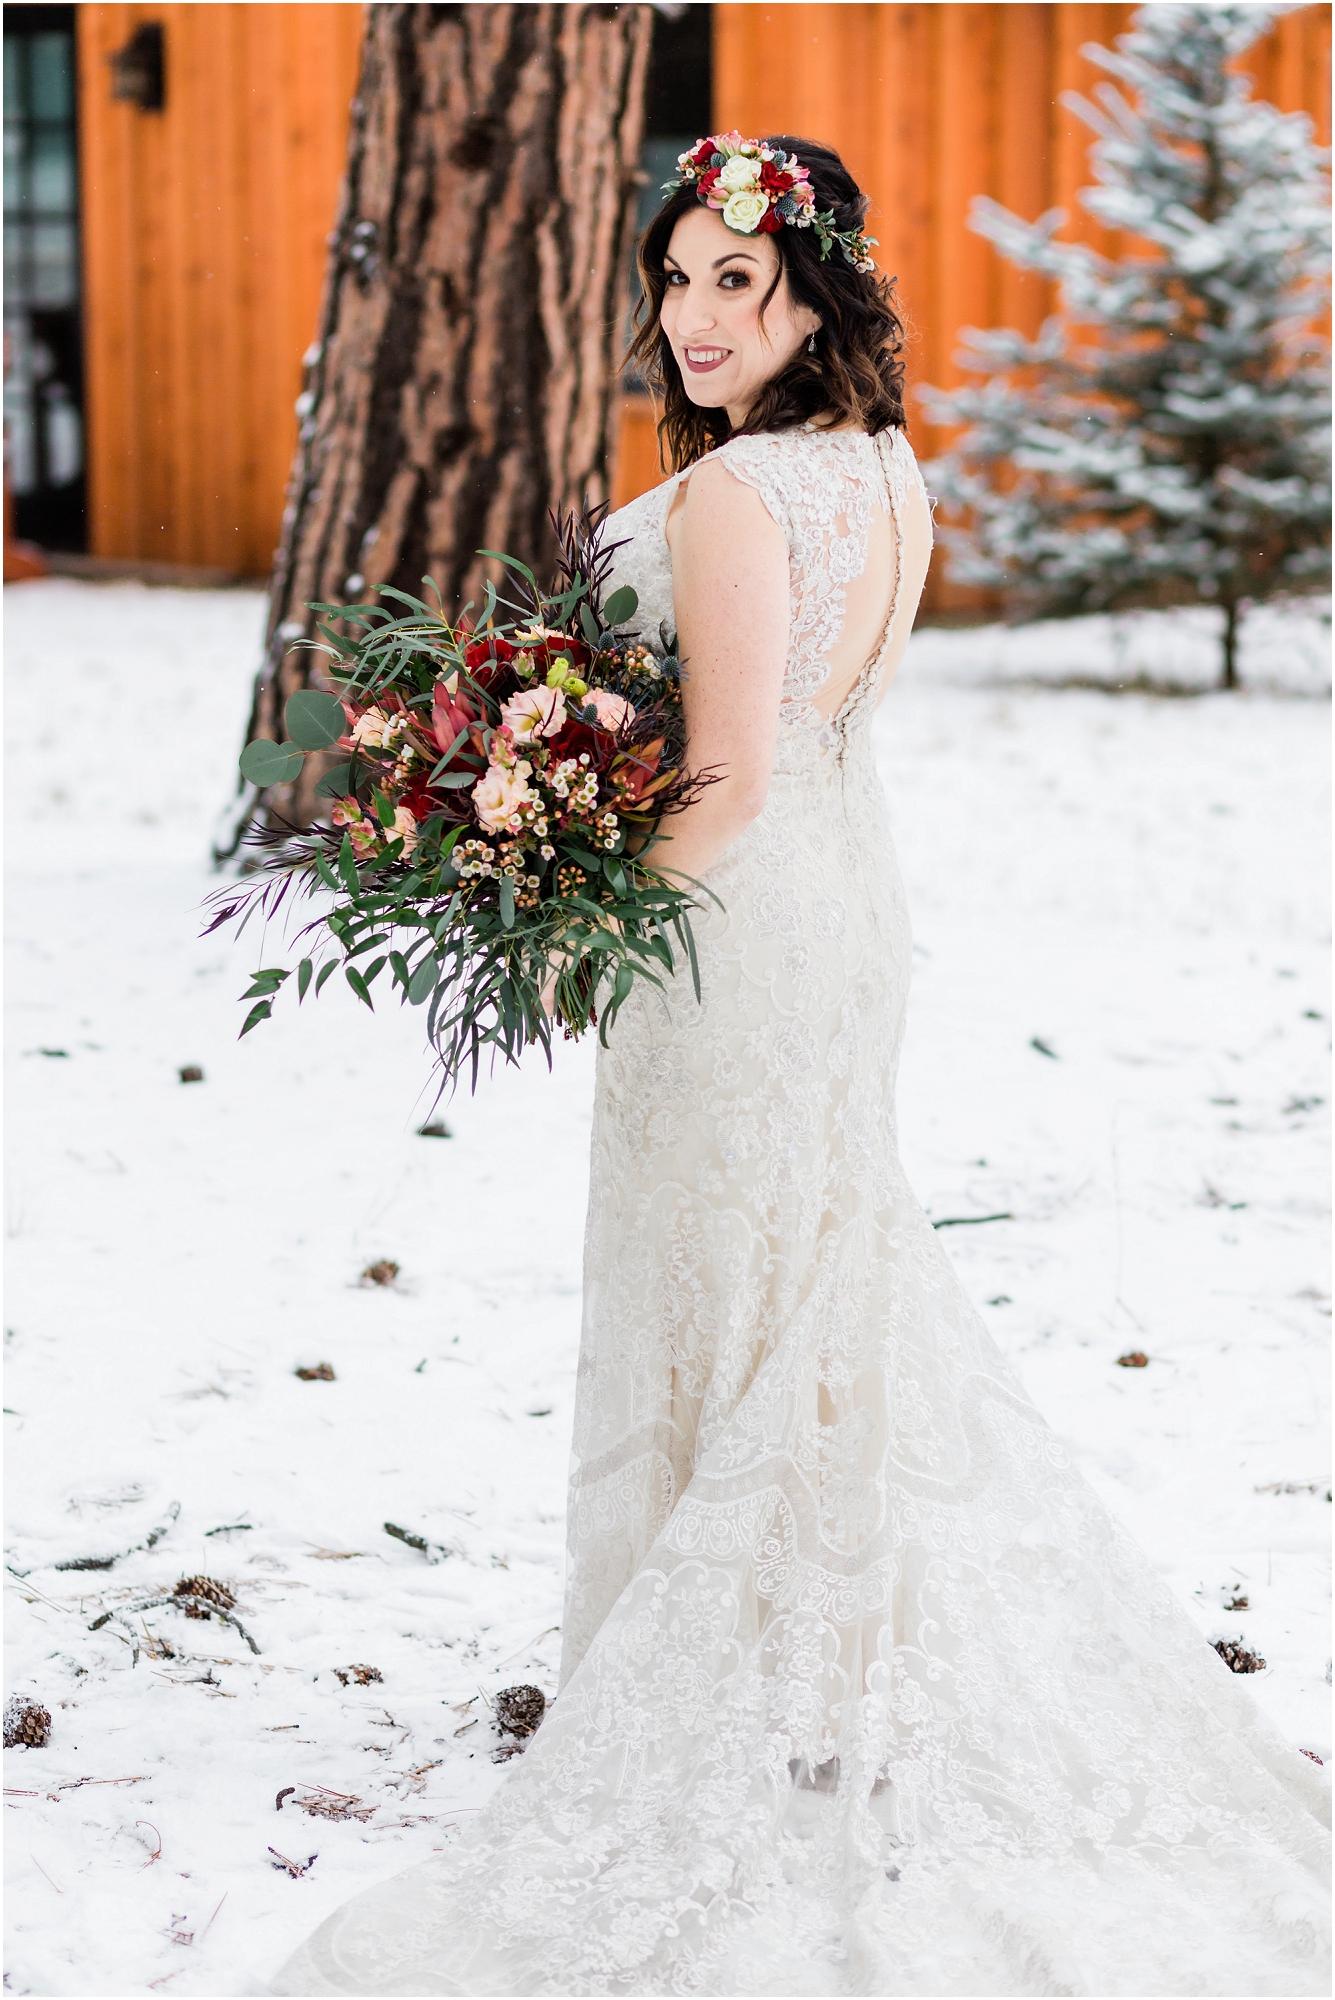 A stunning bride, wearing a white dress with an open keyhole back with buttons, a floral crown and gorgeous bouquet of red and pink roses and greenery sprays stands in the snow covered pines at her Five Pine Lodge Central Oregon winter elopement in Sisters. | Erica Swantek Photography